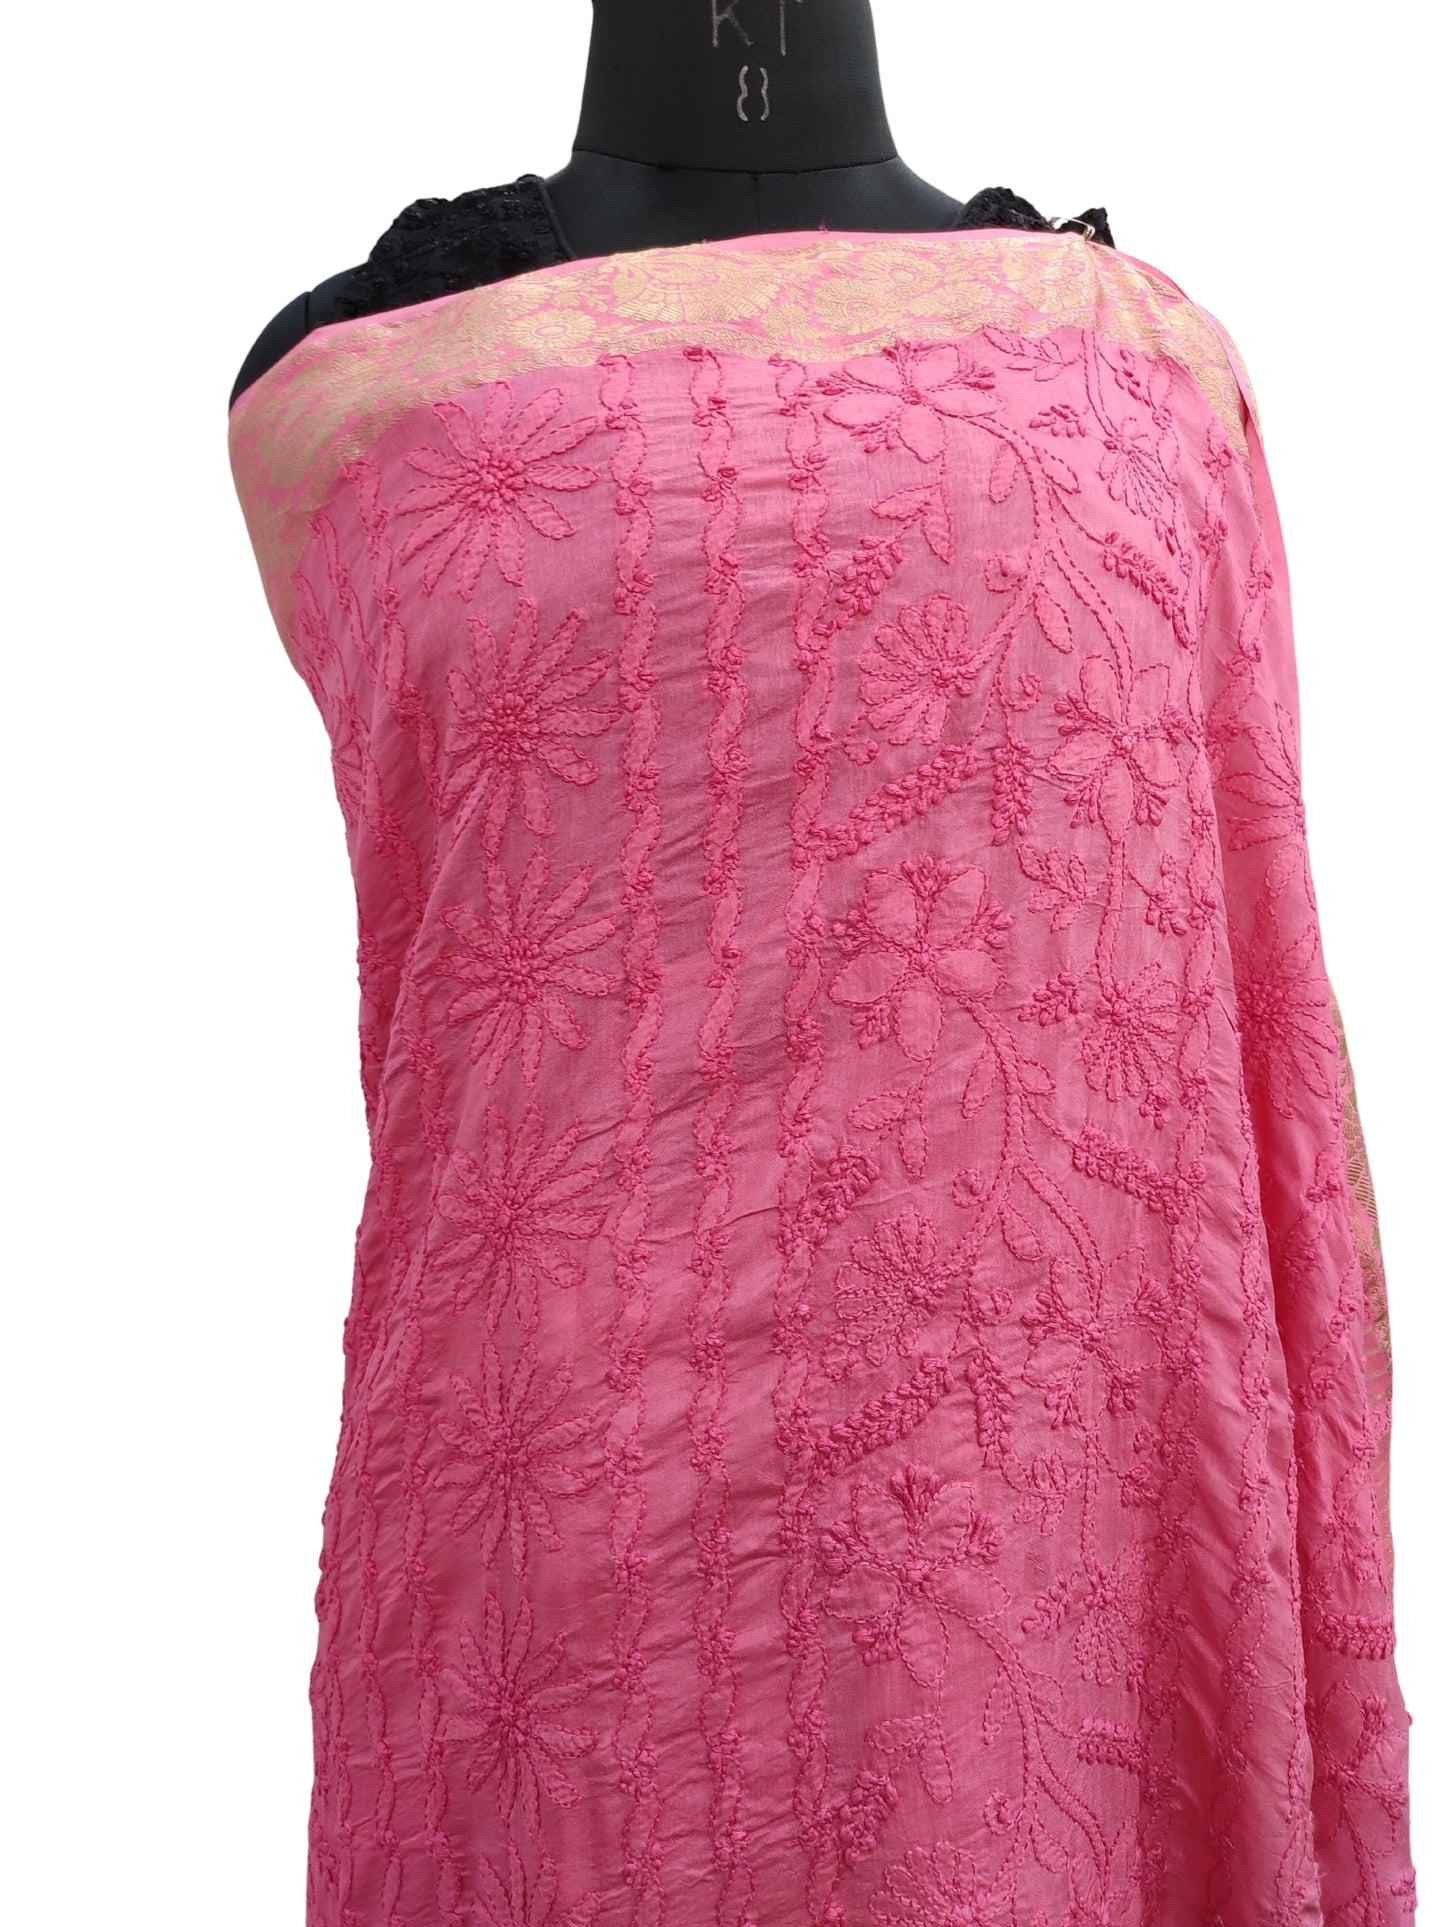 Shyamal Chikan Hand Embroidered Pink Pure Muslin Lucknowi Chikankari Saree With Blouse Piece- S19839